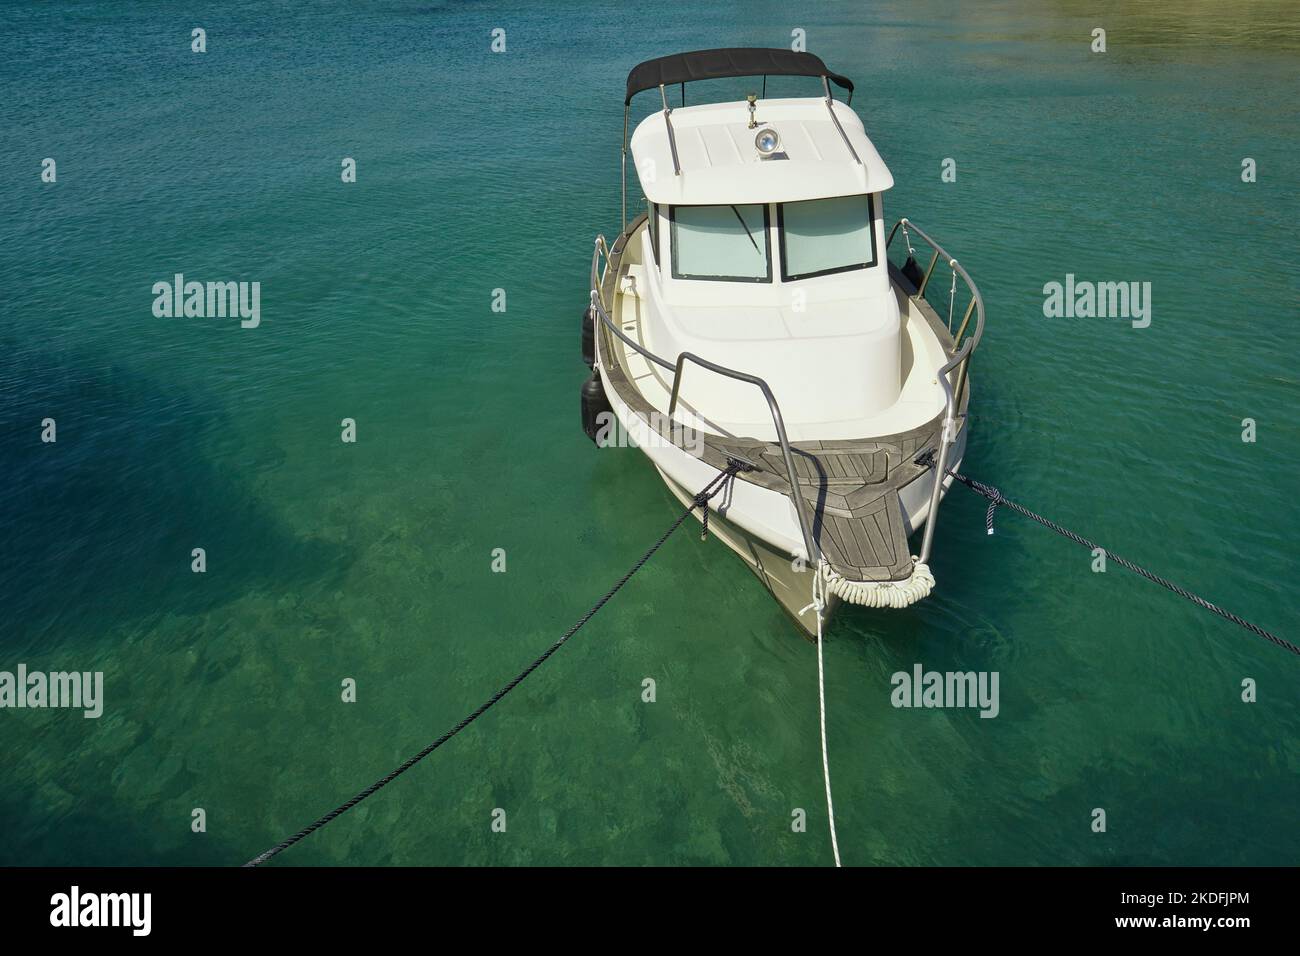 A small boat with cabin and sun roof anchors in the harbor Stock Photo